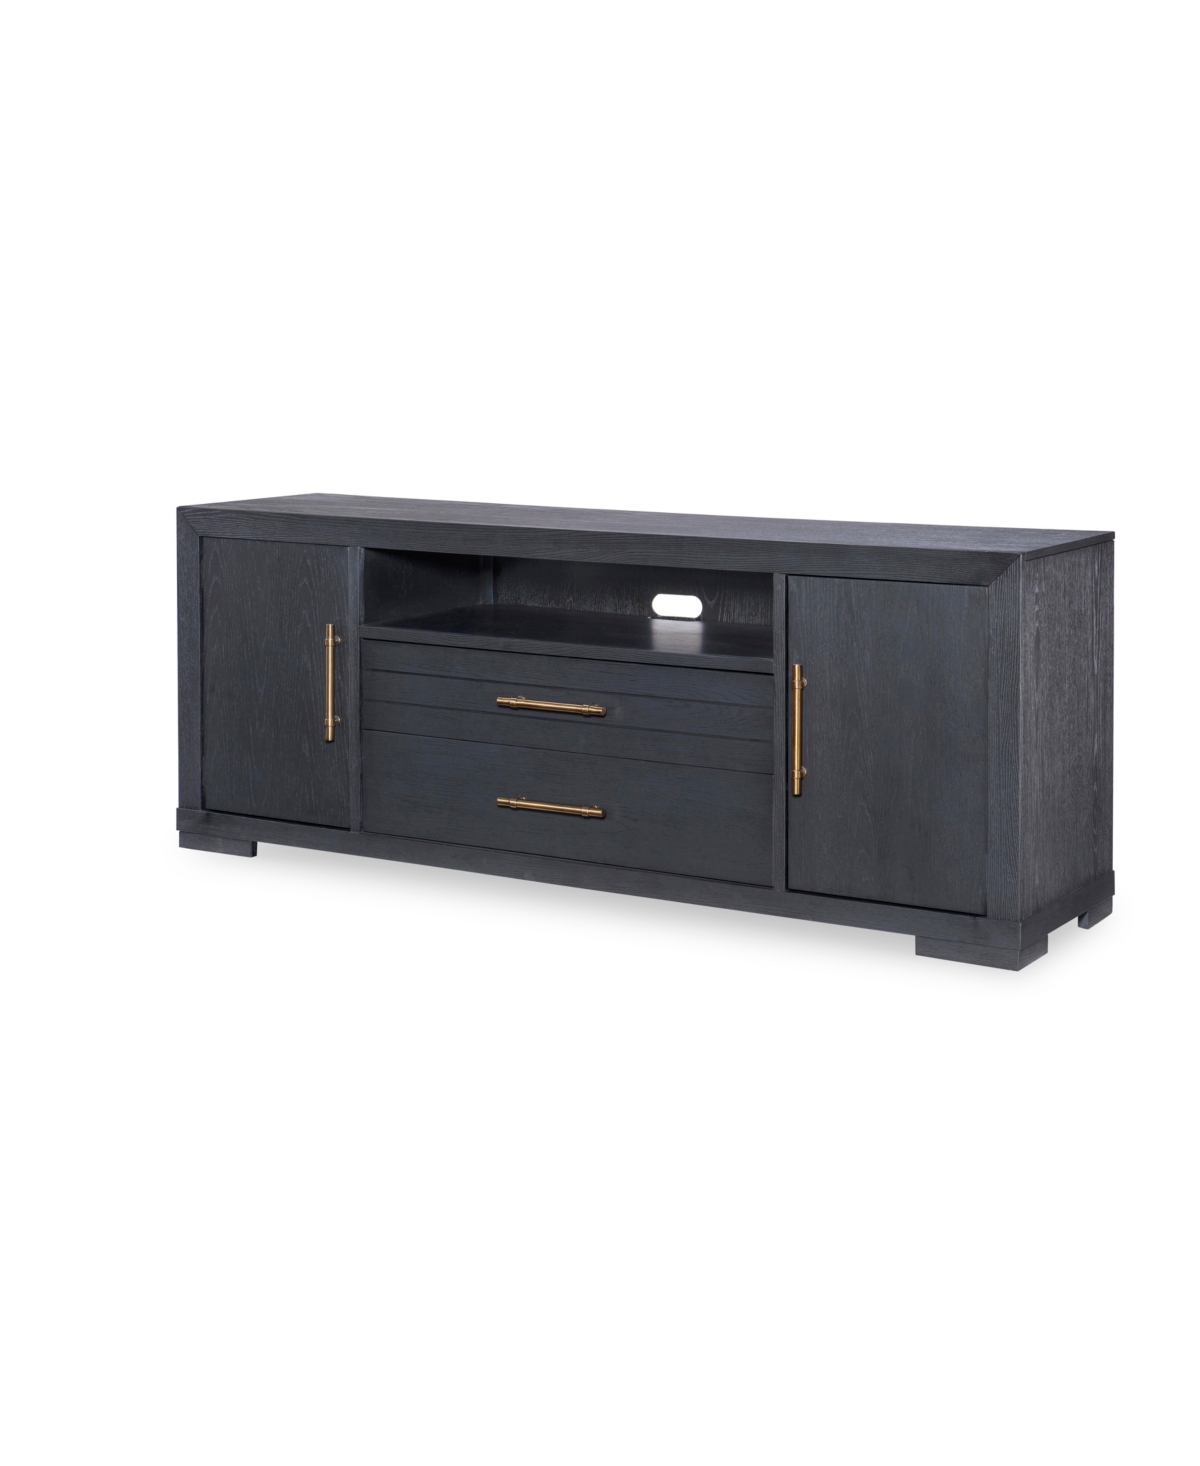 FURNITURE WESTWOOD ENTERTAINMENT CONSOLE